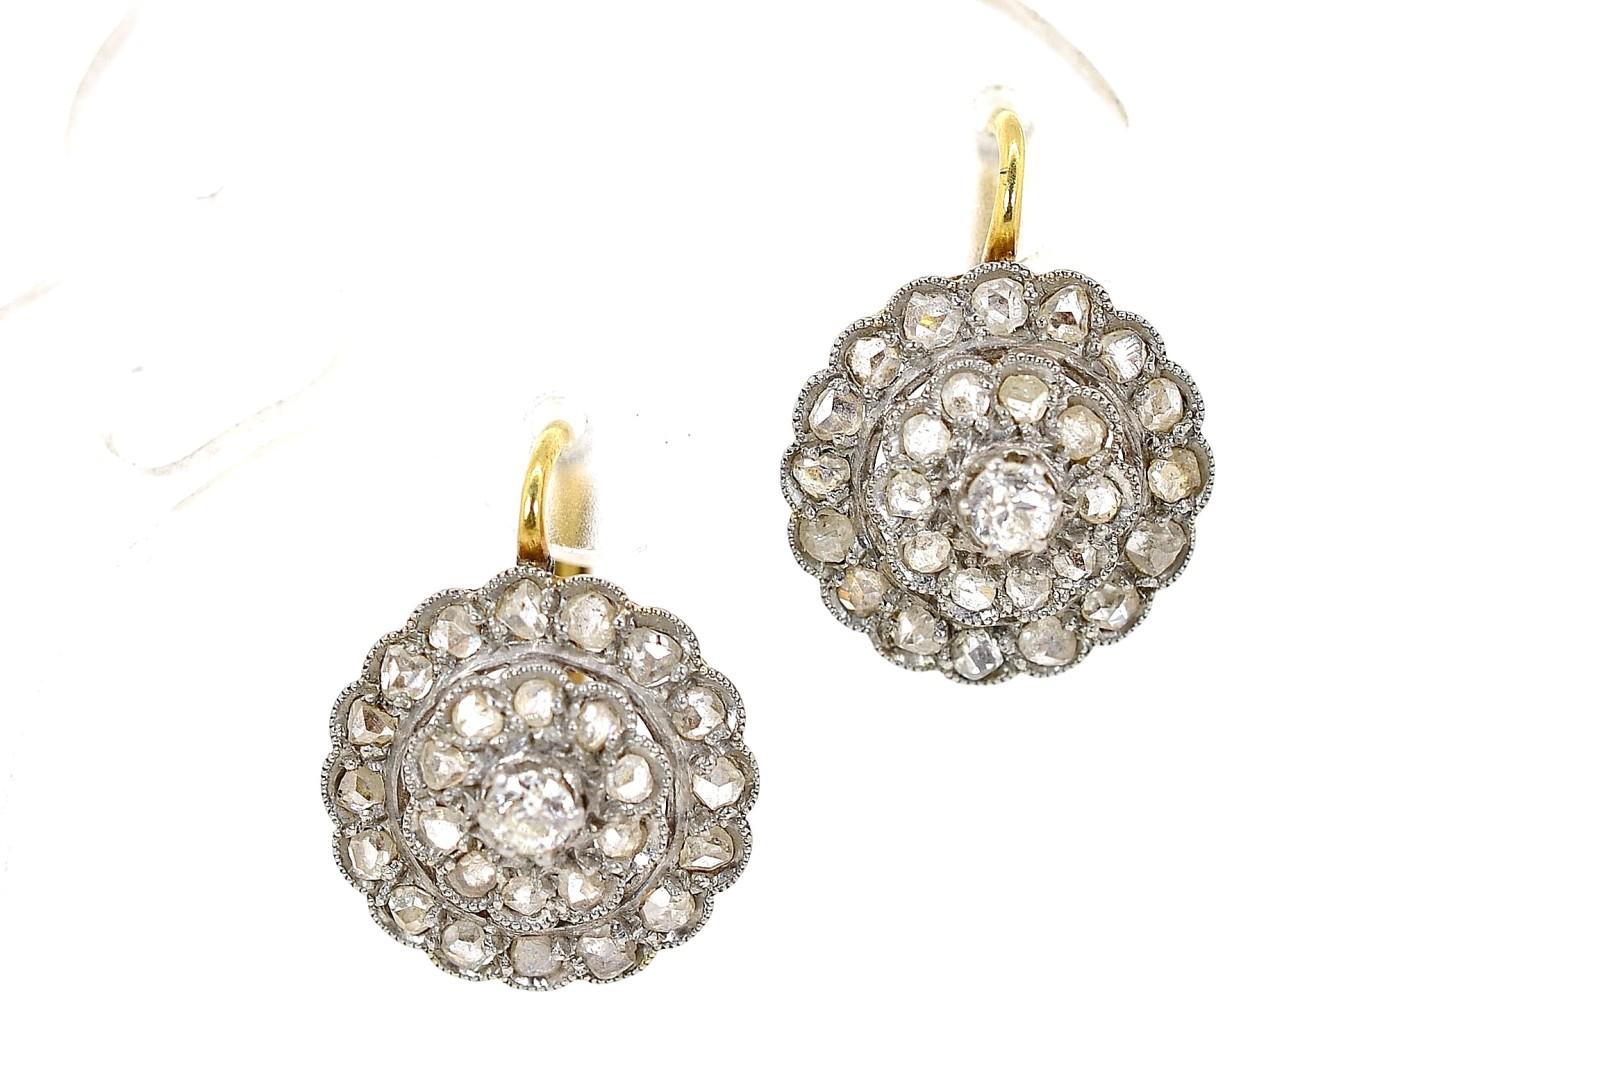 These quintessential 1920s cluster earrings are created in platinum topped 18KT yellow gold.  They are a prime example of simple yet sophisticated everyday earrings.  Each center is set with one Old European Cut Diamond surrounded by Rose cut